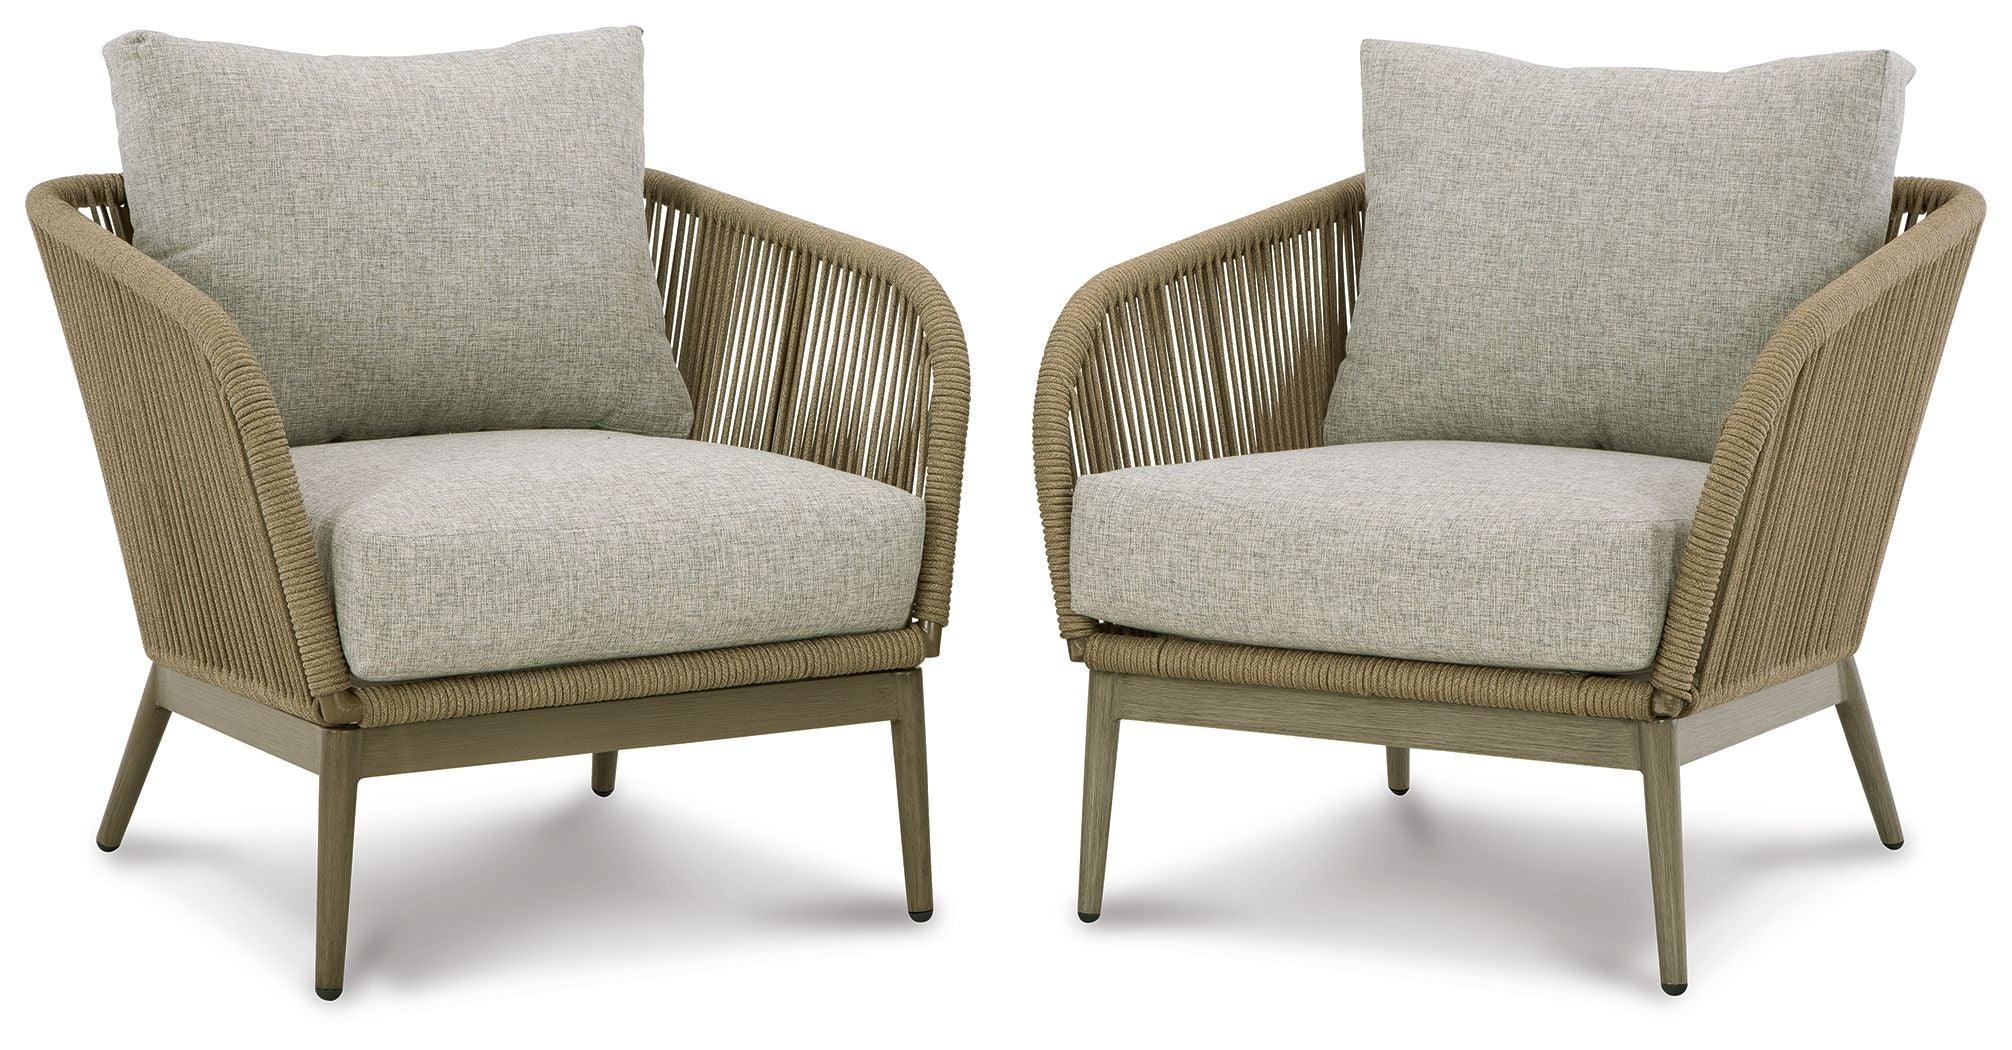 Signature Design by Ashley® - Swiss Valley - Beige - Lounge Chair W/Cushion (Set of 2) - 5th Avenue Furniture